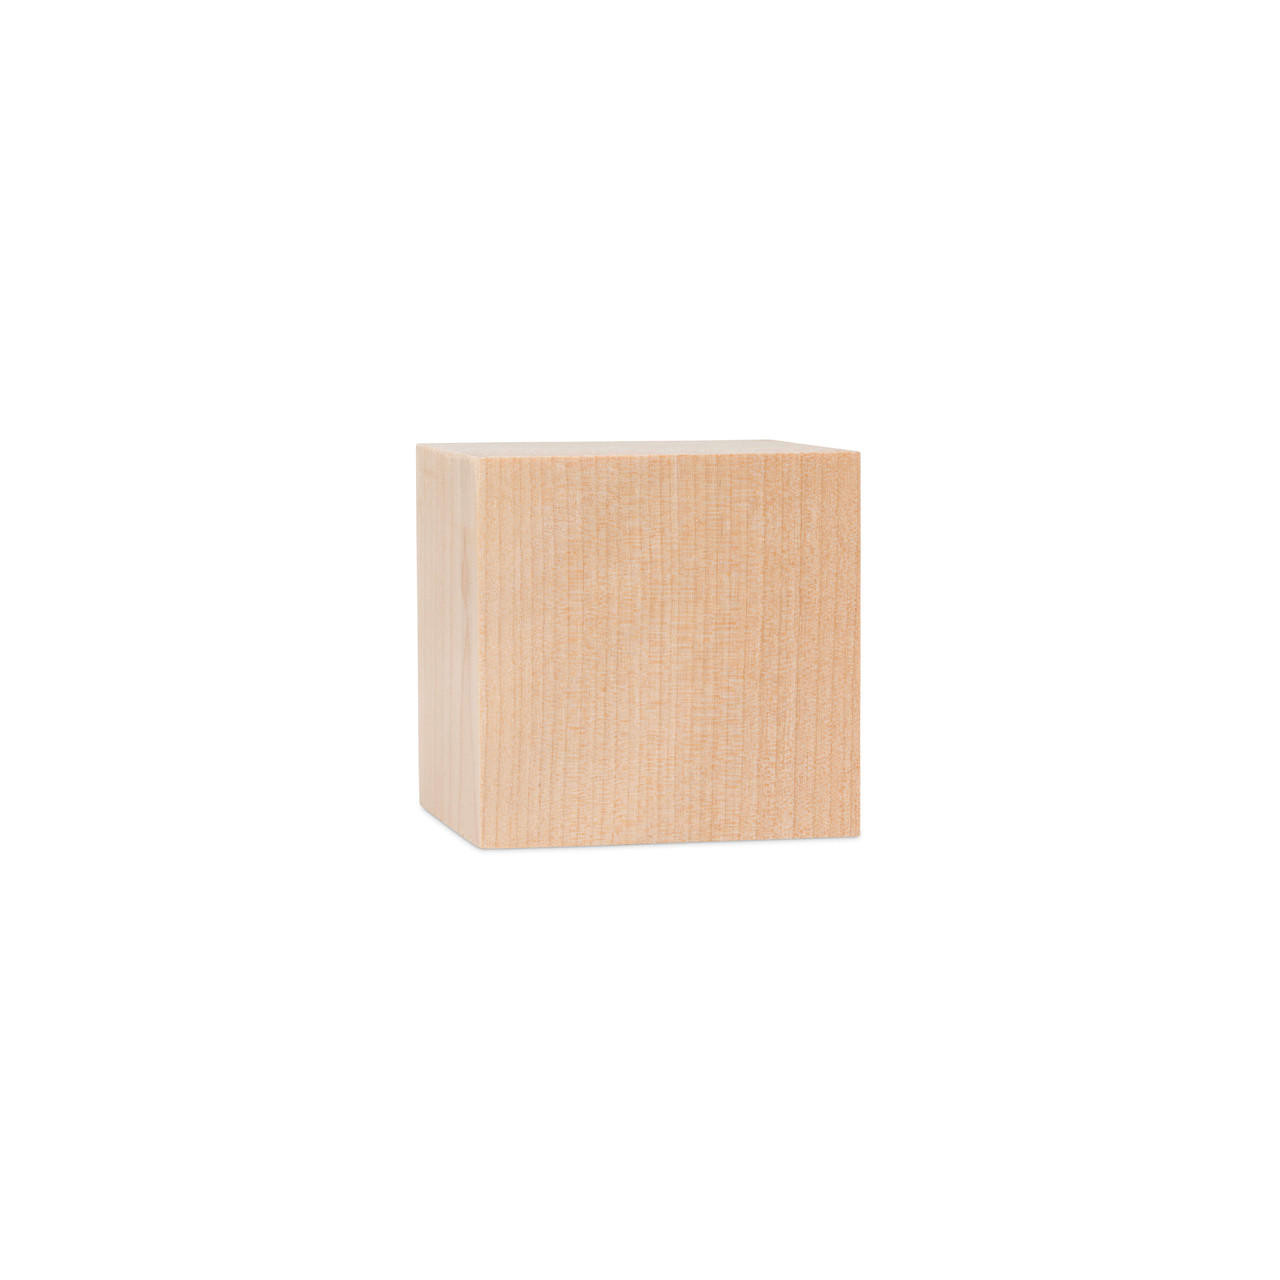 wooden cubes 1 inch